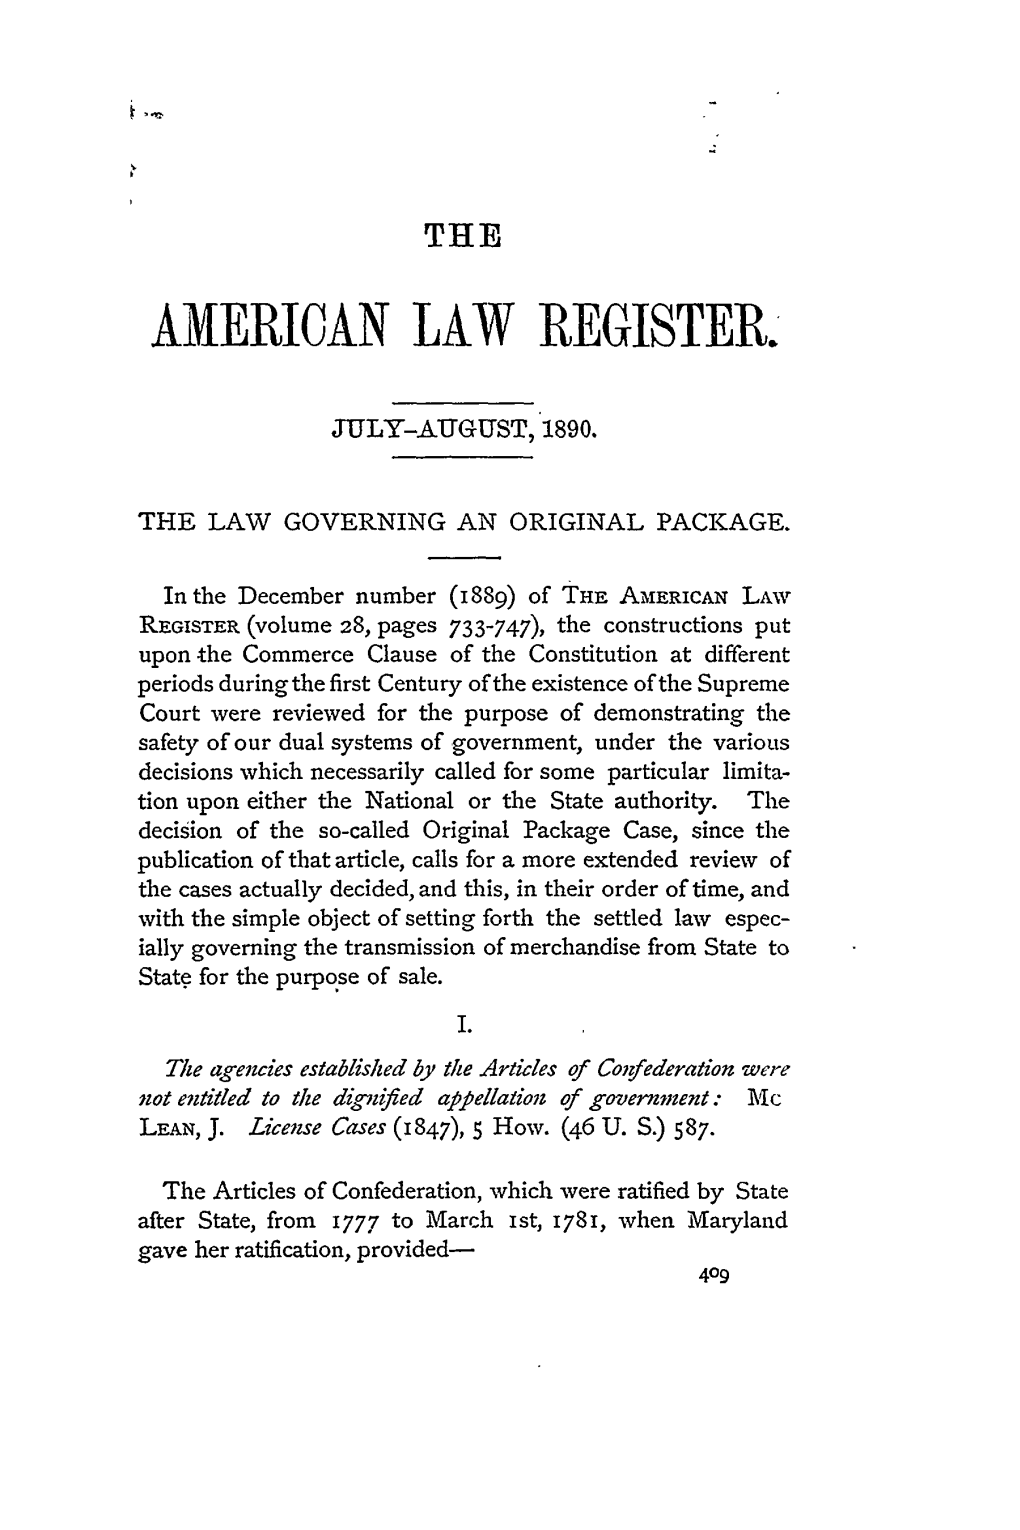 The Law Governing an Original Package